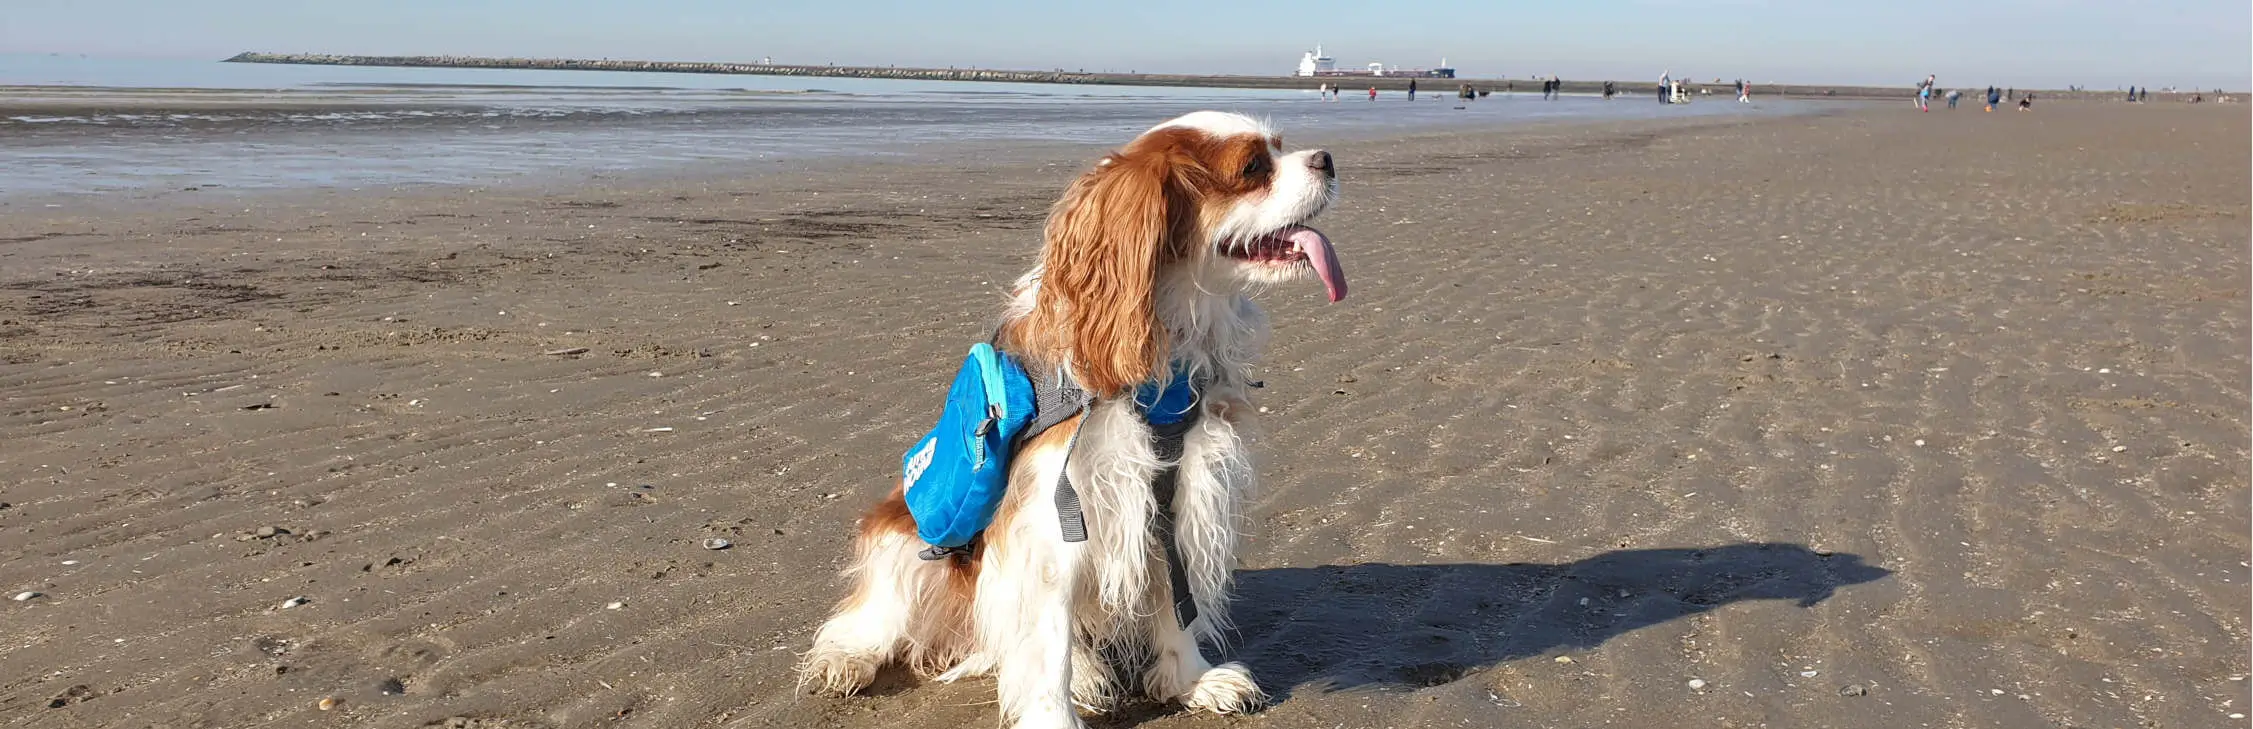 My dog with her hiking backpack at the beach